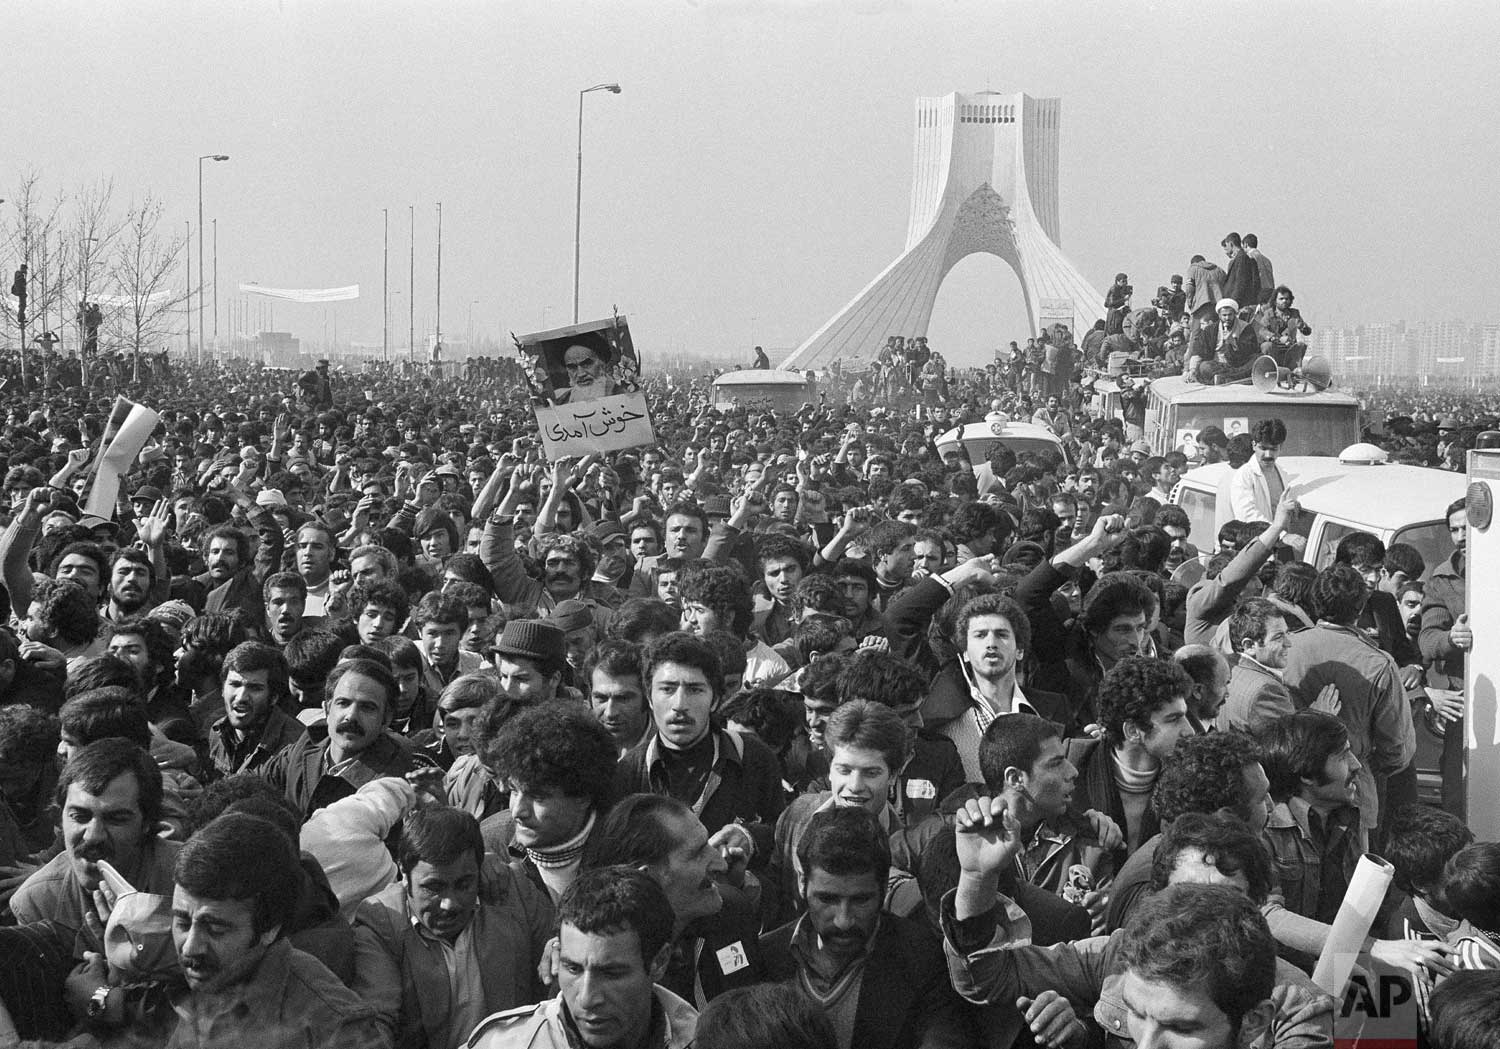  In this Feb. 1, 1979 photo, the motorcade of Ayatollah Ruhollah Khomeini is lost among the throngs of supporters at the Shayad, a landmark memorial to the shah, near the airport in Tehran, Iran. (AP Photo/FY) 